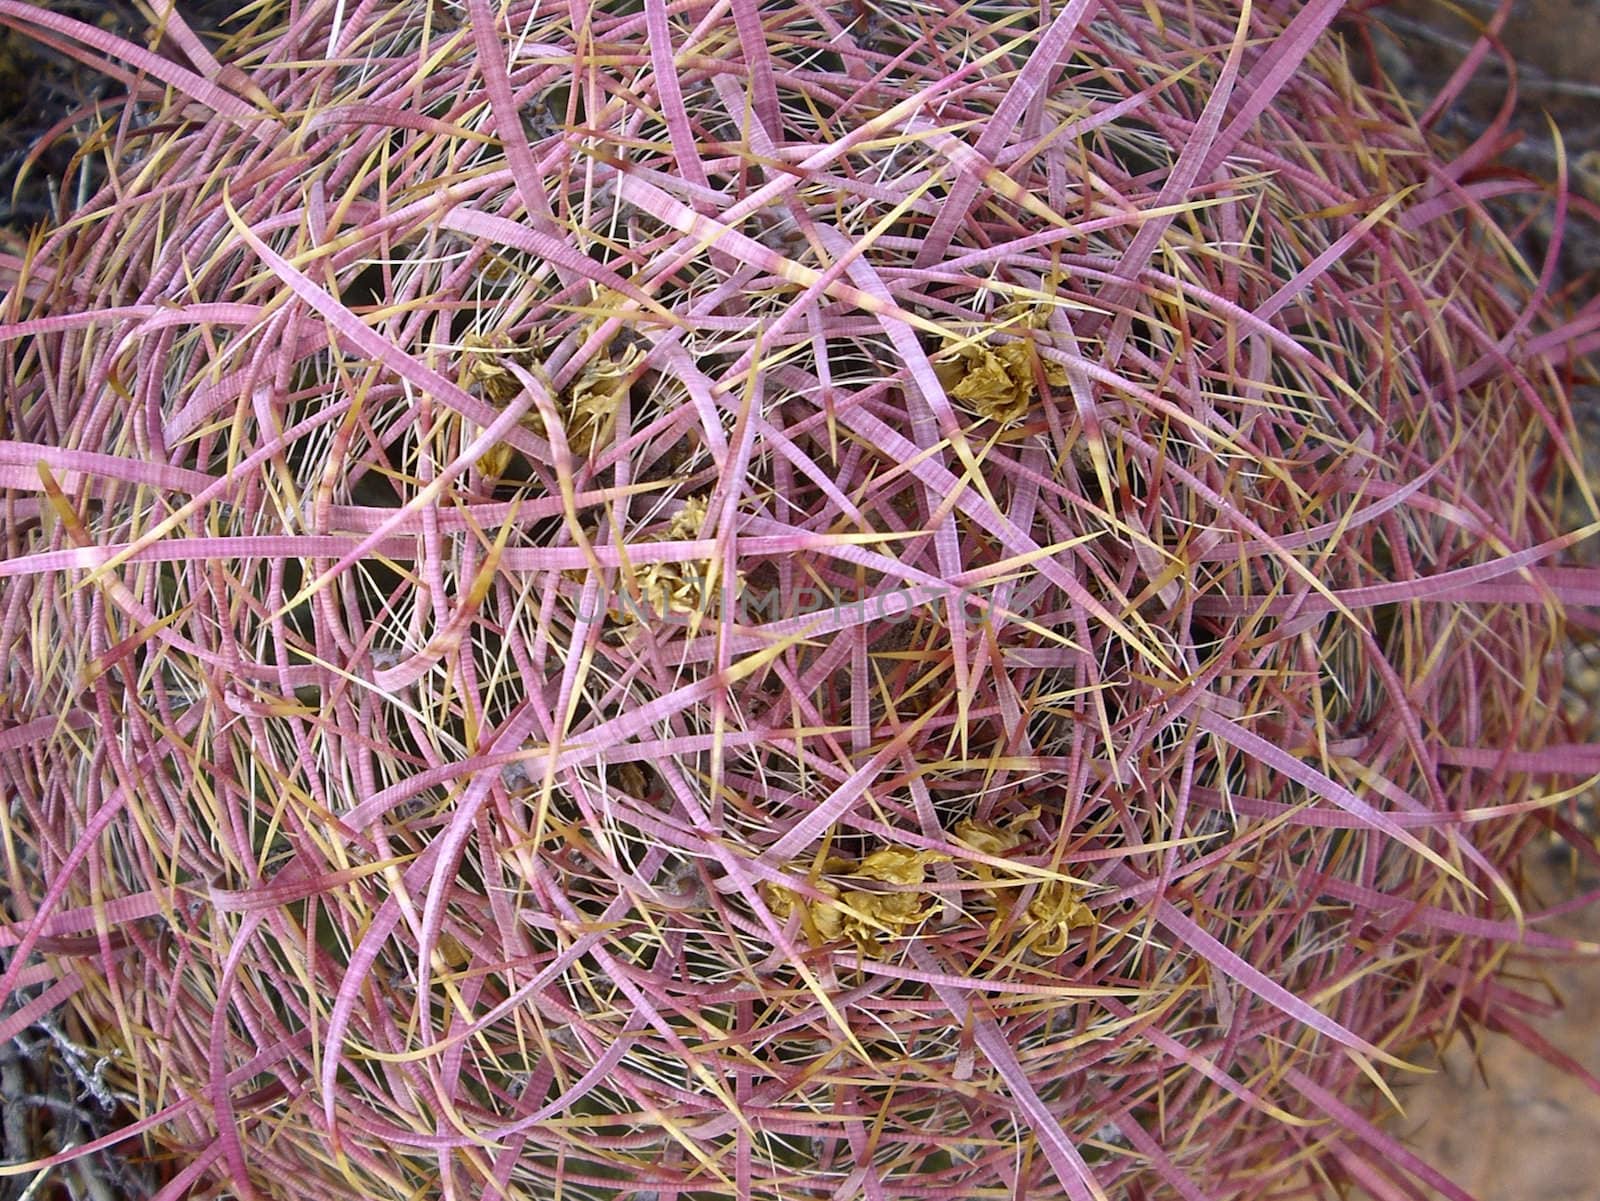 Spines of the red Barrel Cactus up close in Valley of Fire State Park, Nevada 